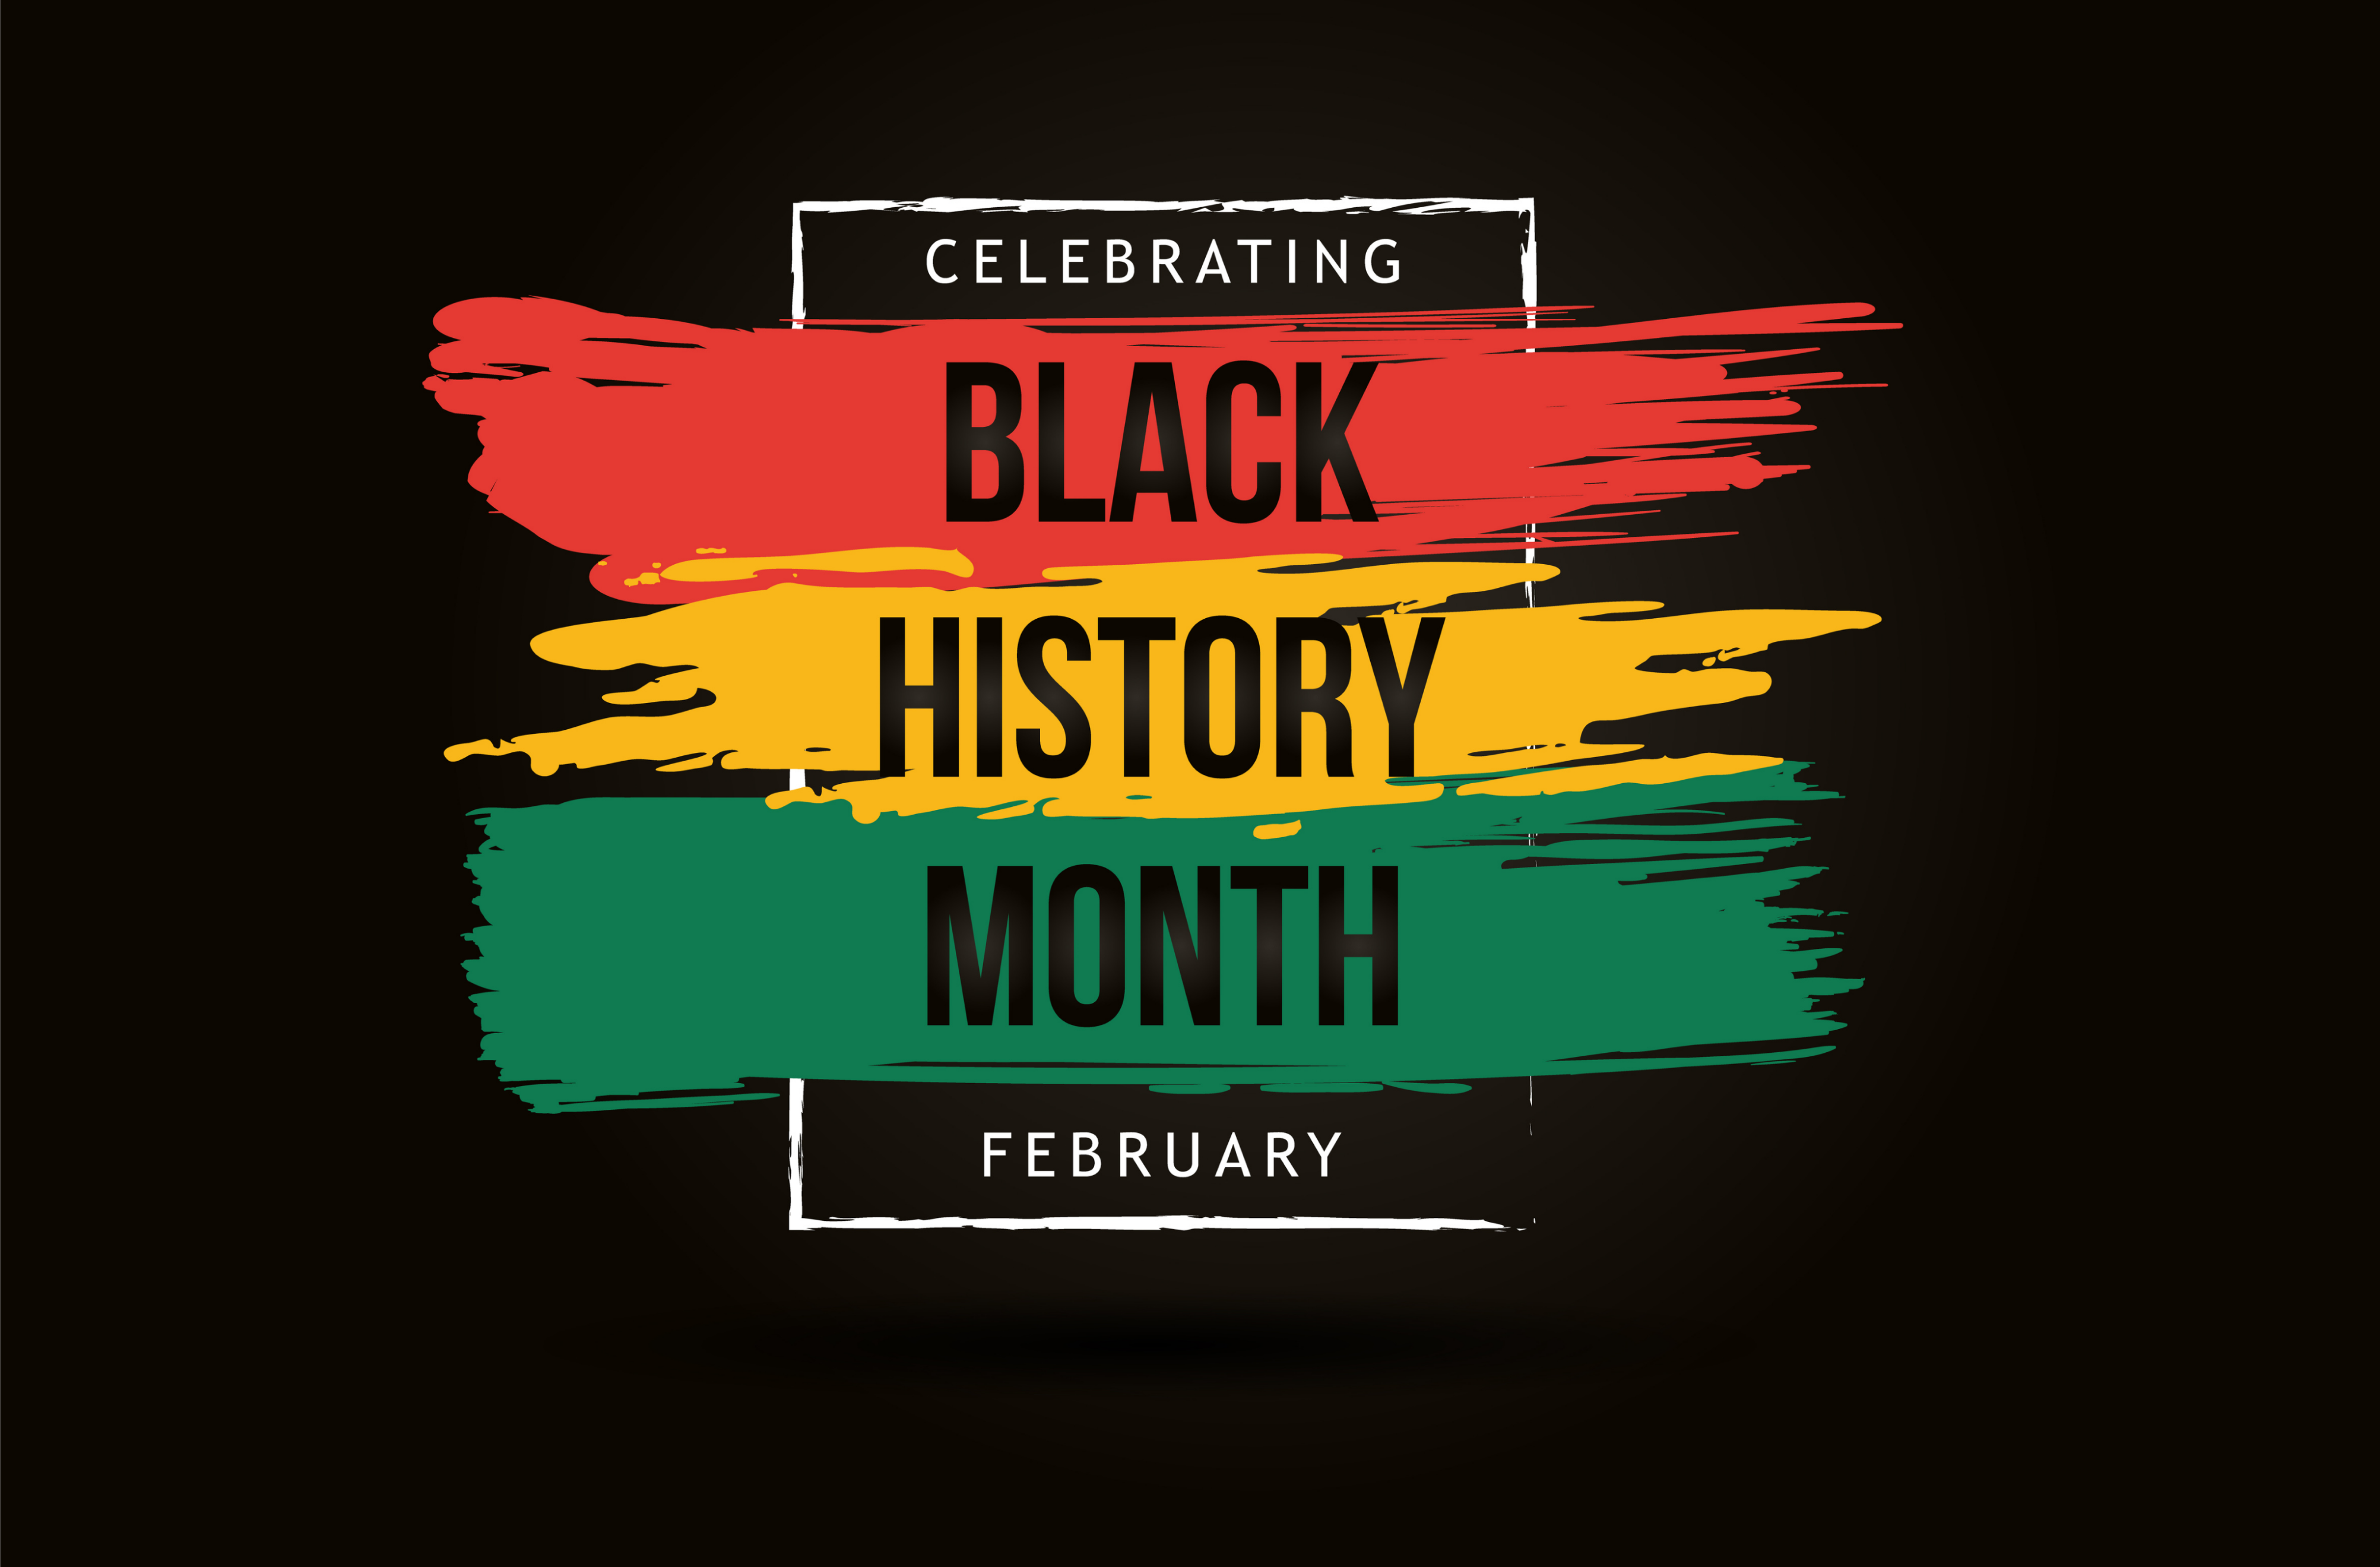 Celebrate Black History Month at UW The Whole U